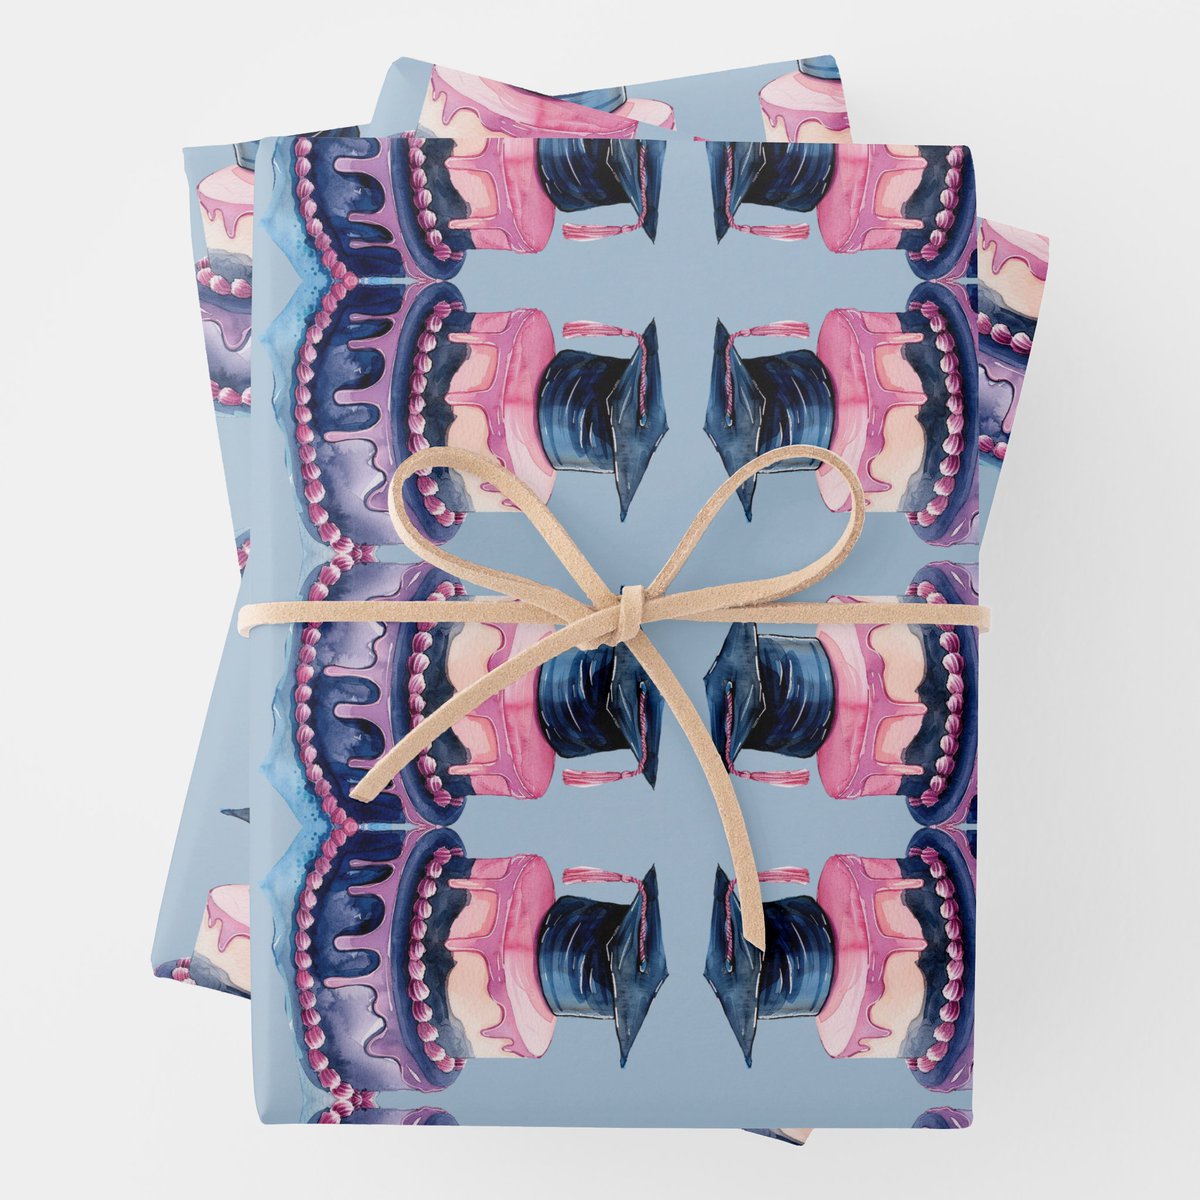 'Gifts as bright as their future! 🎓🎁 Wrap up success with our graduation wrapping sheets.
#GraduationSeason, #GiftIdeas, #GraduationParty
#CelebrationTime,#ClassOf2024, #PartySupplies
#GiftWrap, 

Graduation pattern wrapping paper sheets zazzle.com/z/jklohcpe via @zazzle